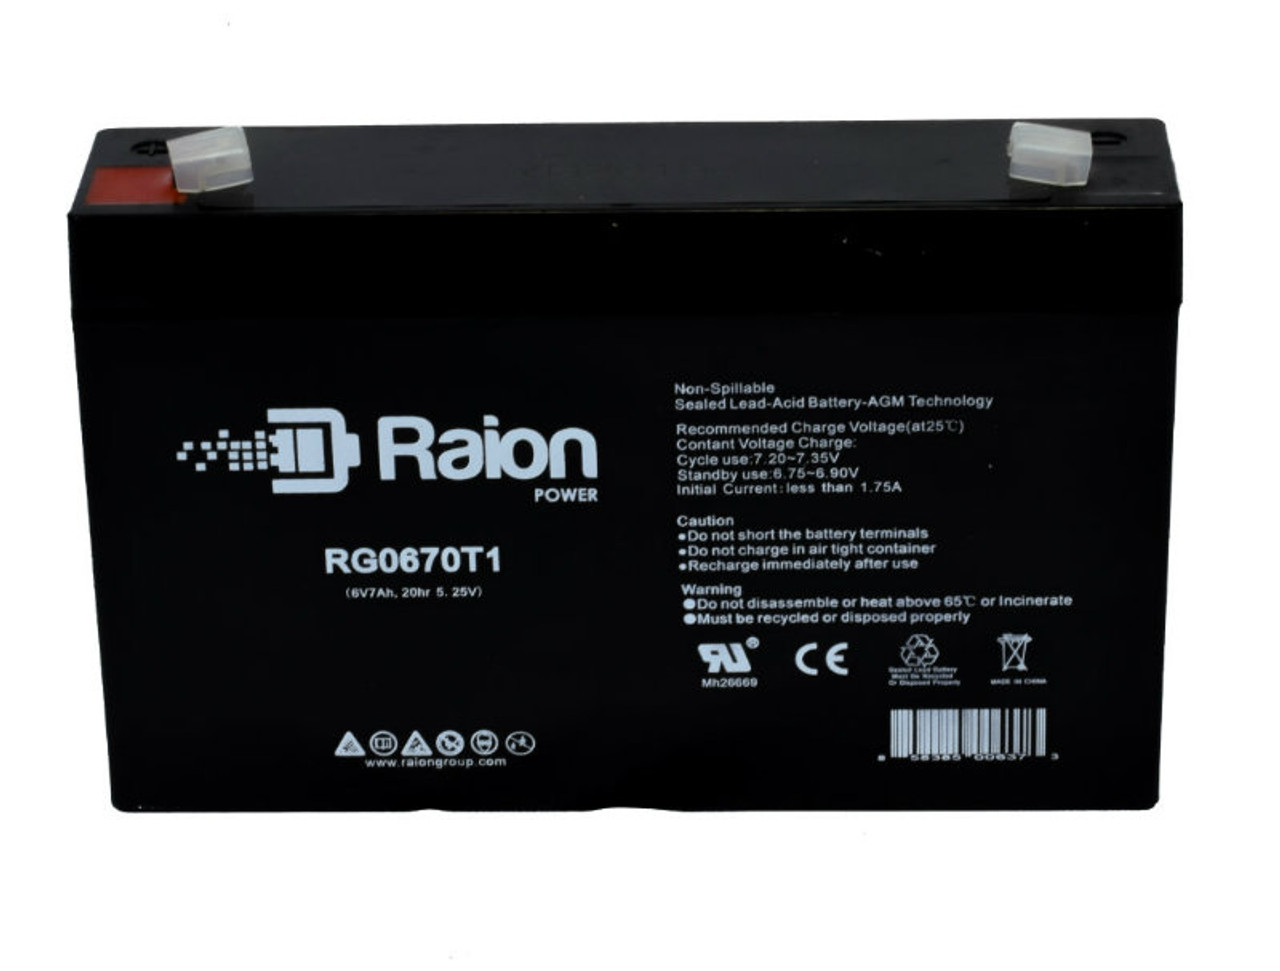 Raion Power RG0670T1 Replacement Battery Cartridge for Teledyne Big Beam ET6S5